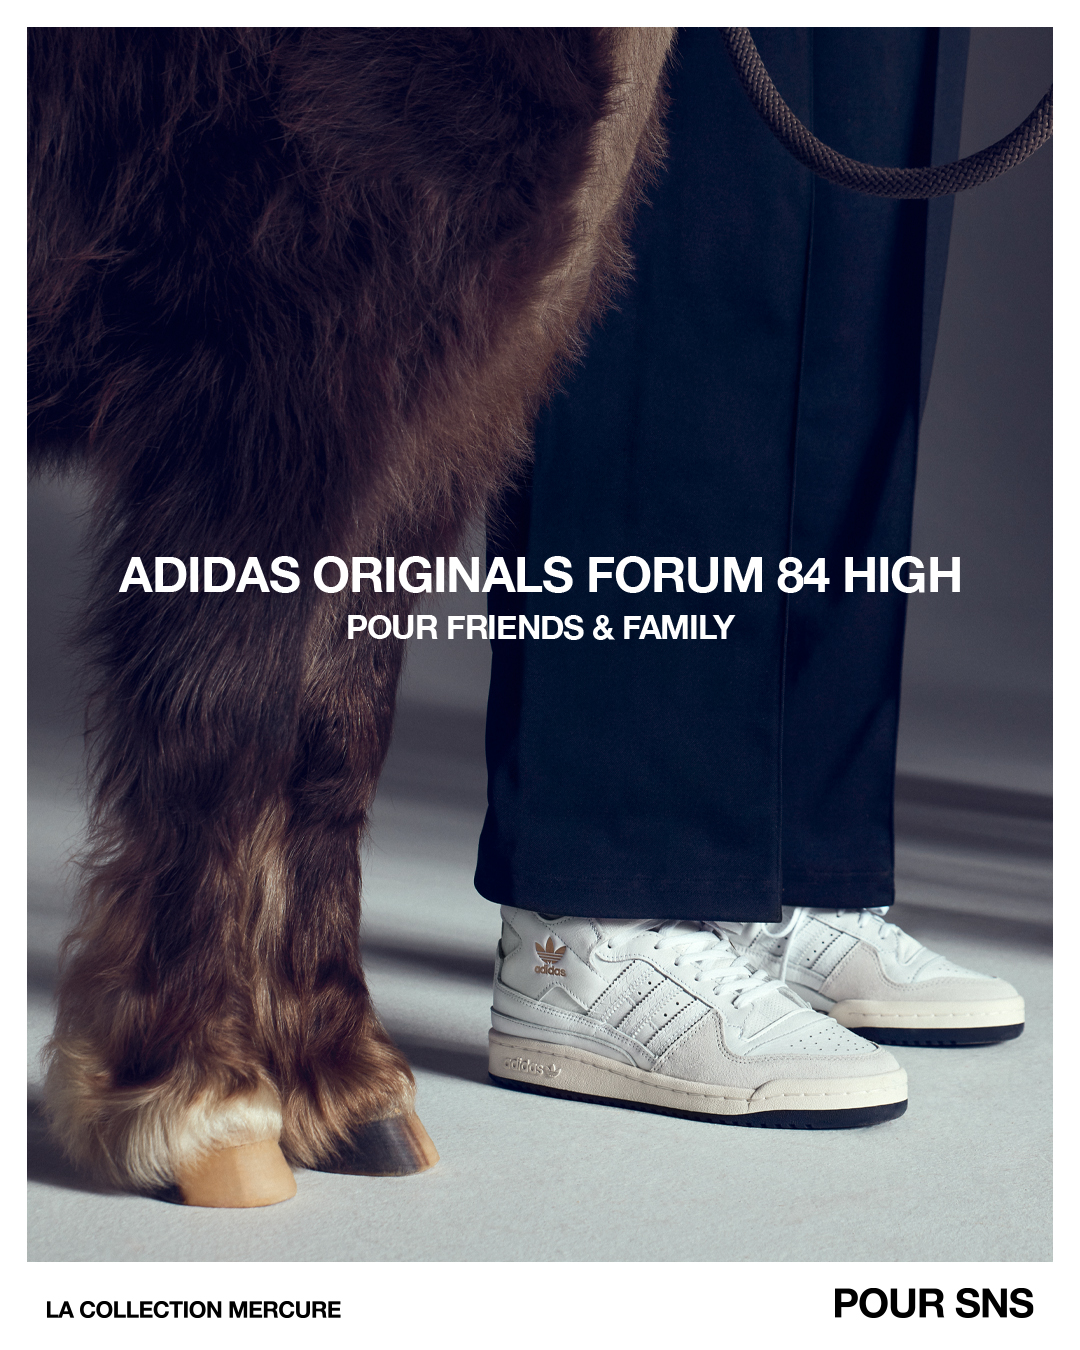 Twitter 上的sns Sns X Adidas Originals Forum 84 High Friends Amp Family A Luxurious Take On The Retro Silhouette With Faux Snakeskin Overlays Suede Accents And Gold Foiled Branding T Co Wukxpsaclj Twitter